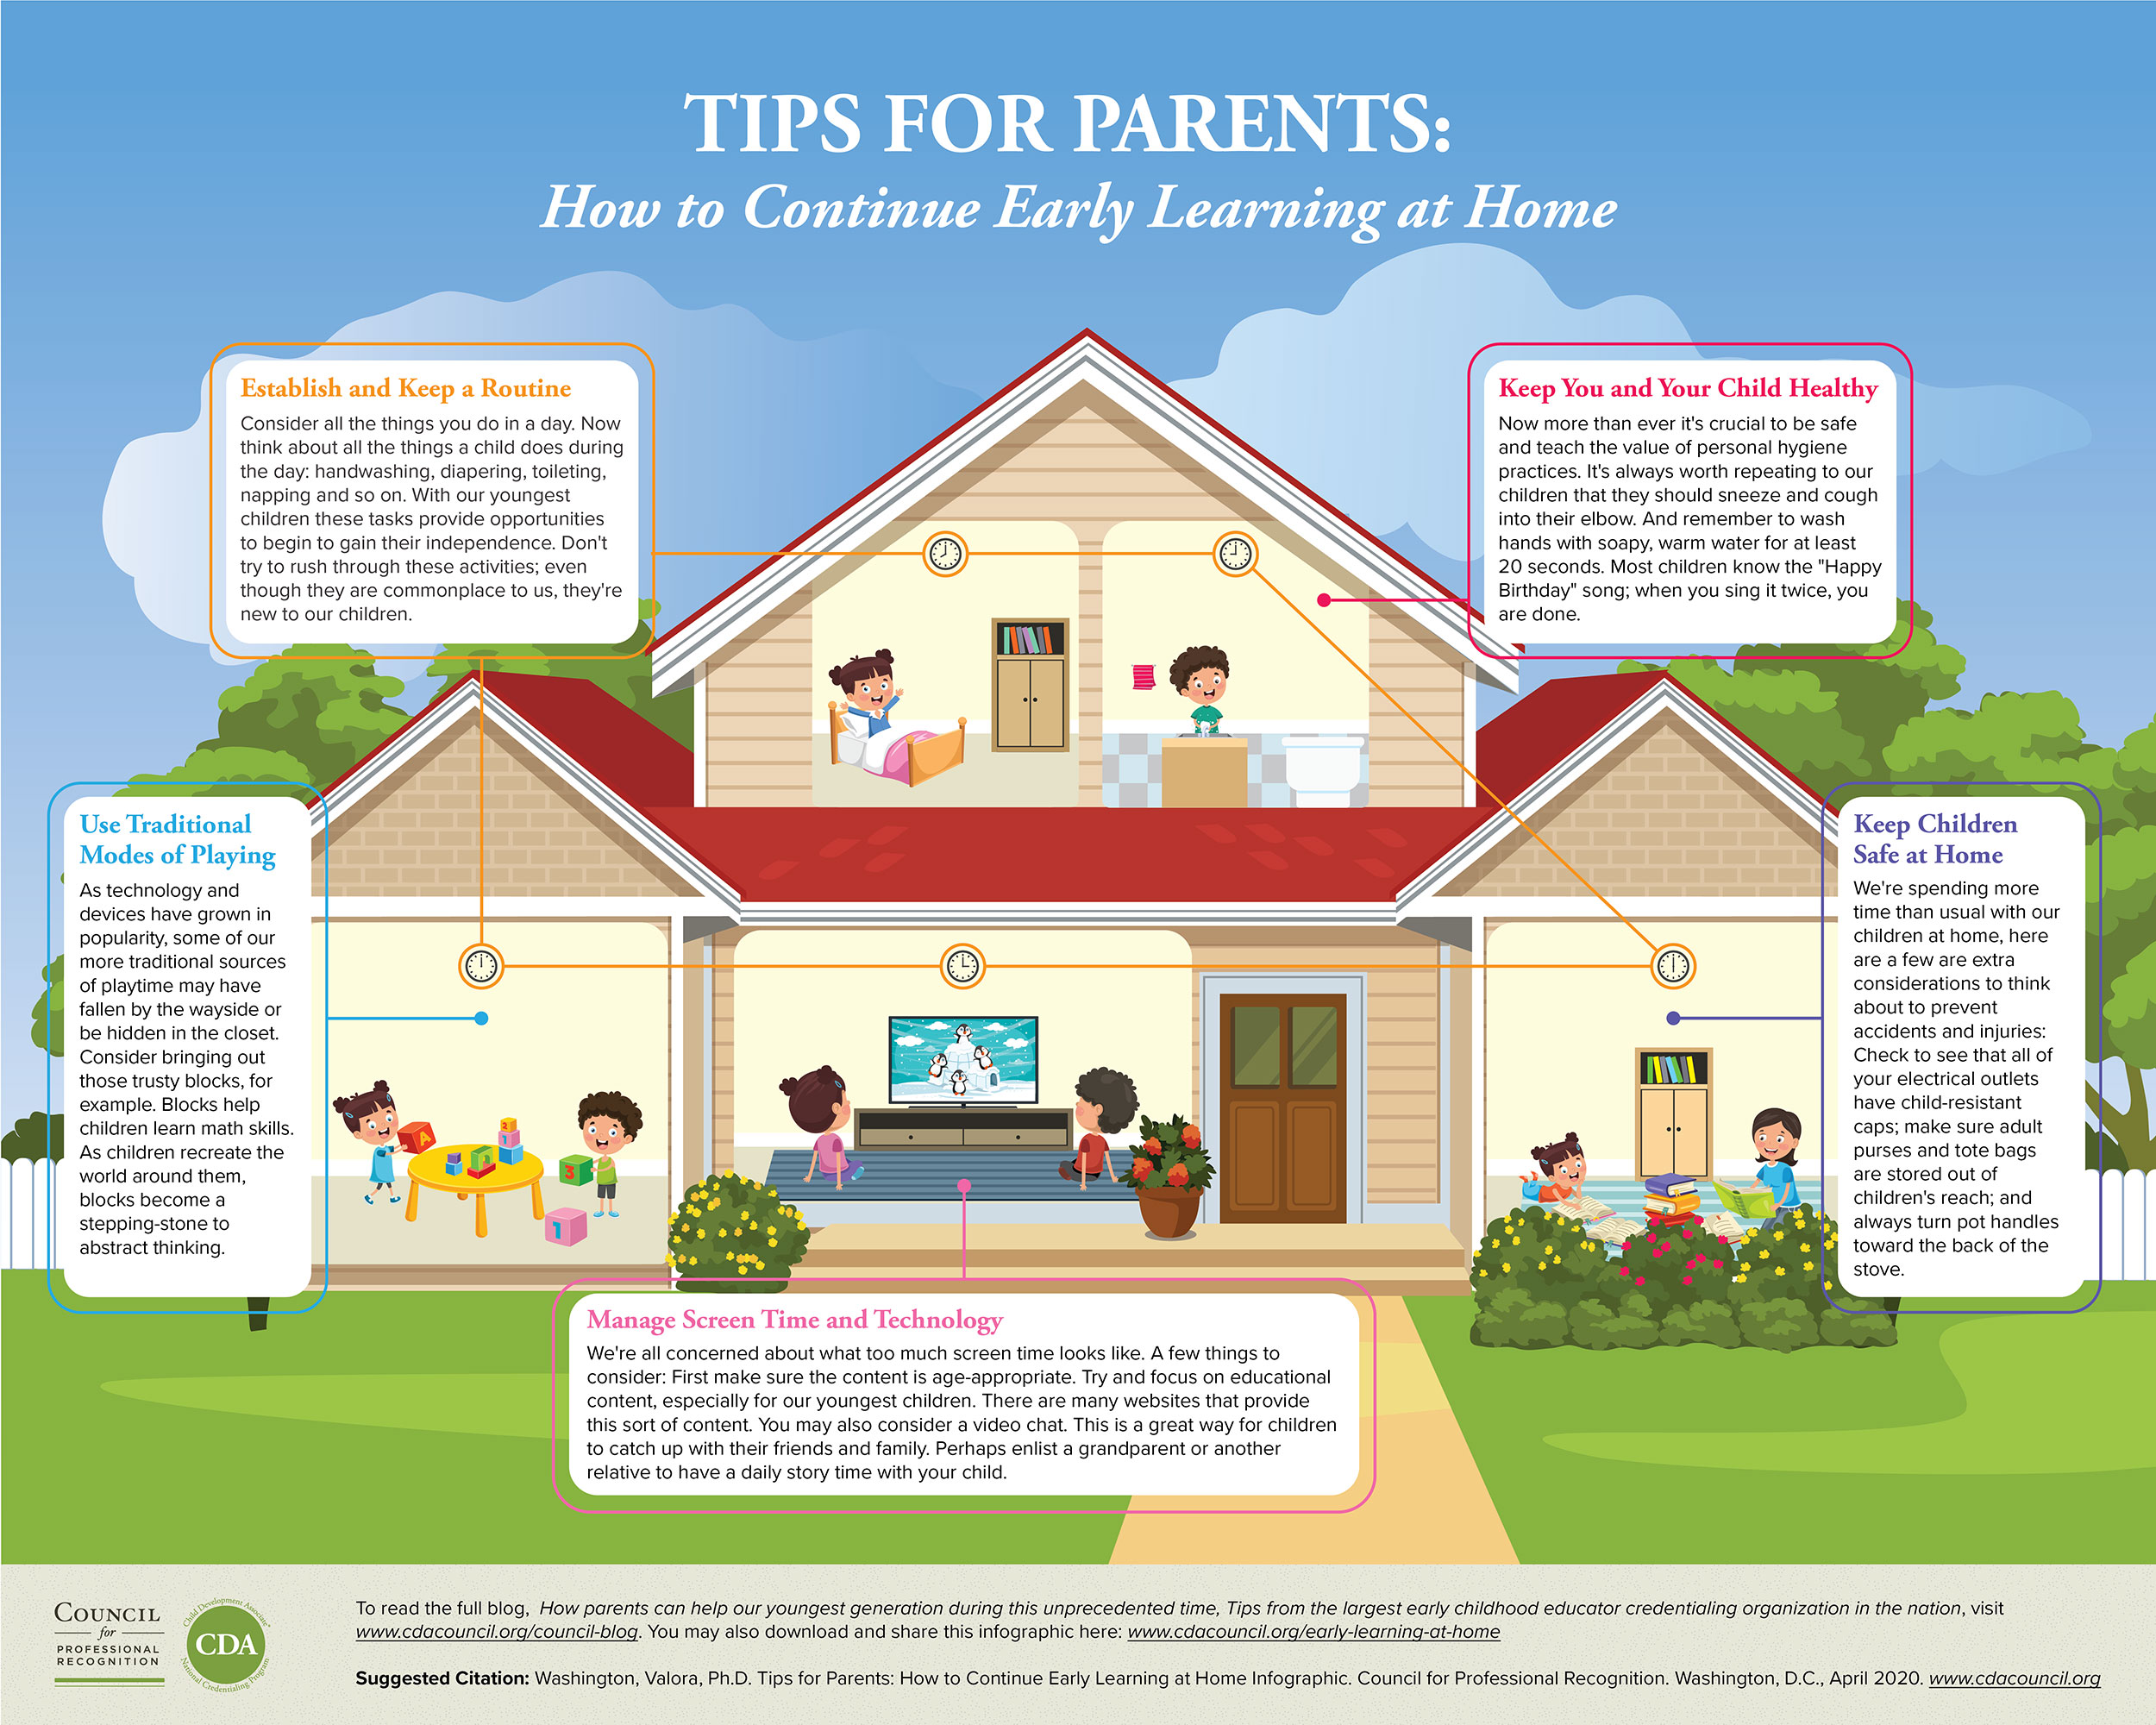 tips-for-parents-how-to-continue-early-learning-at-home-cda-council